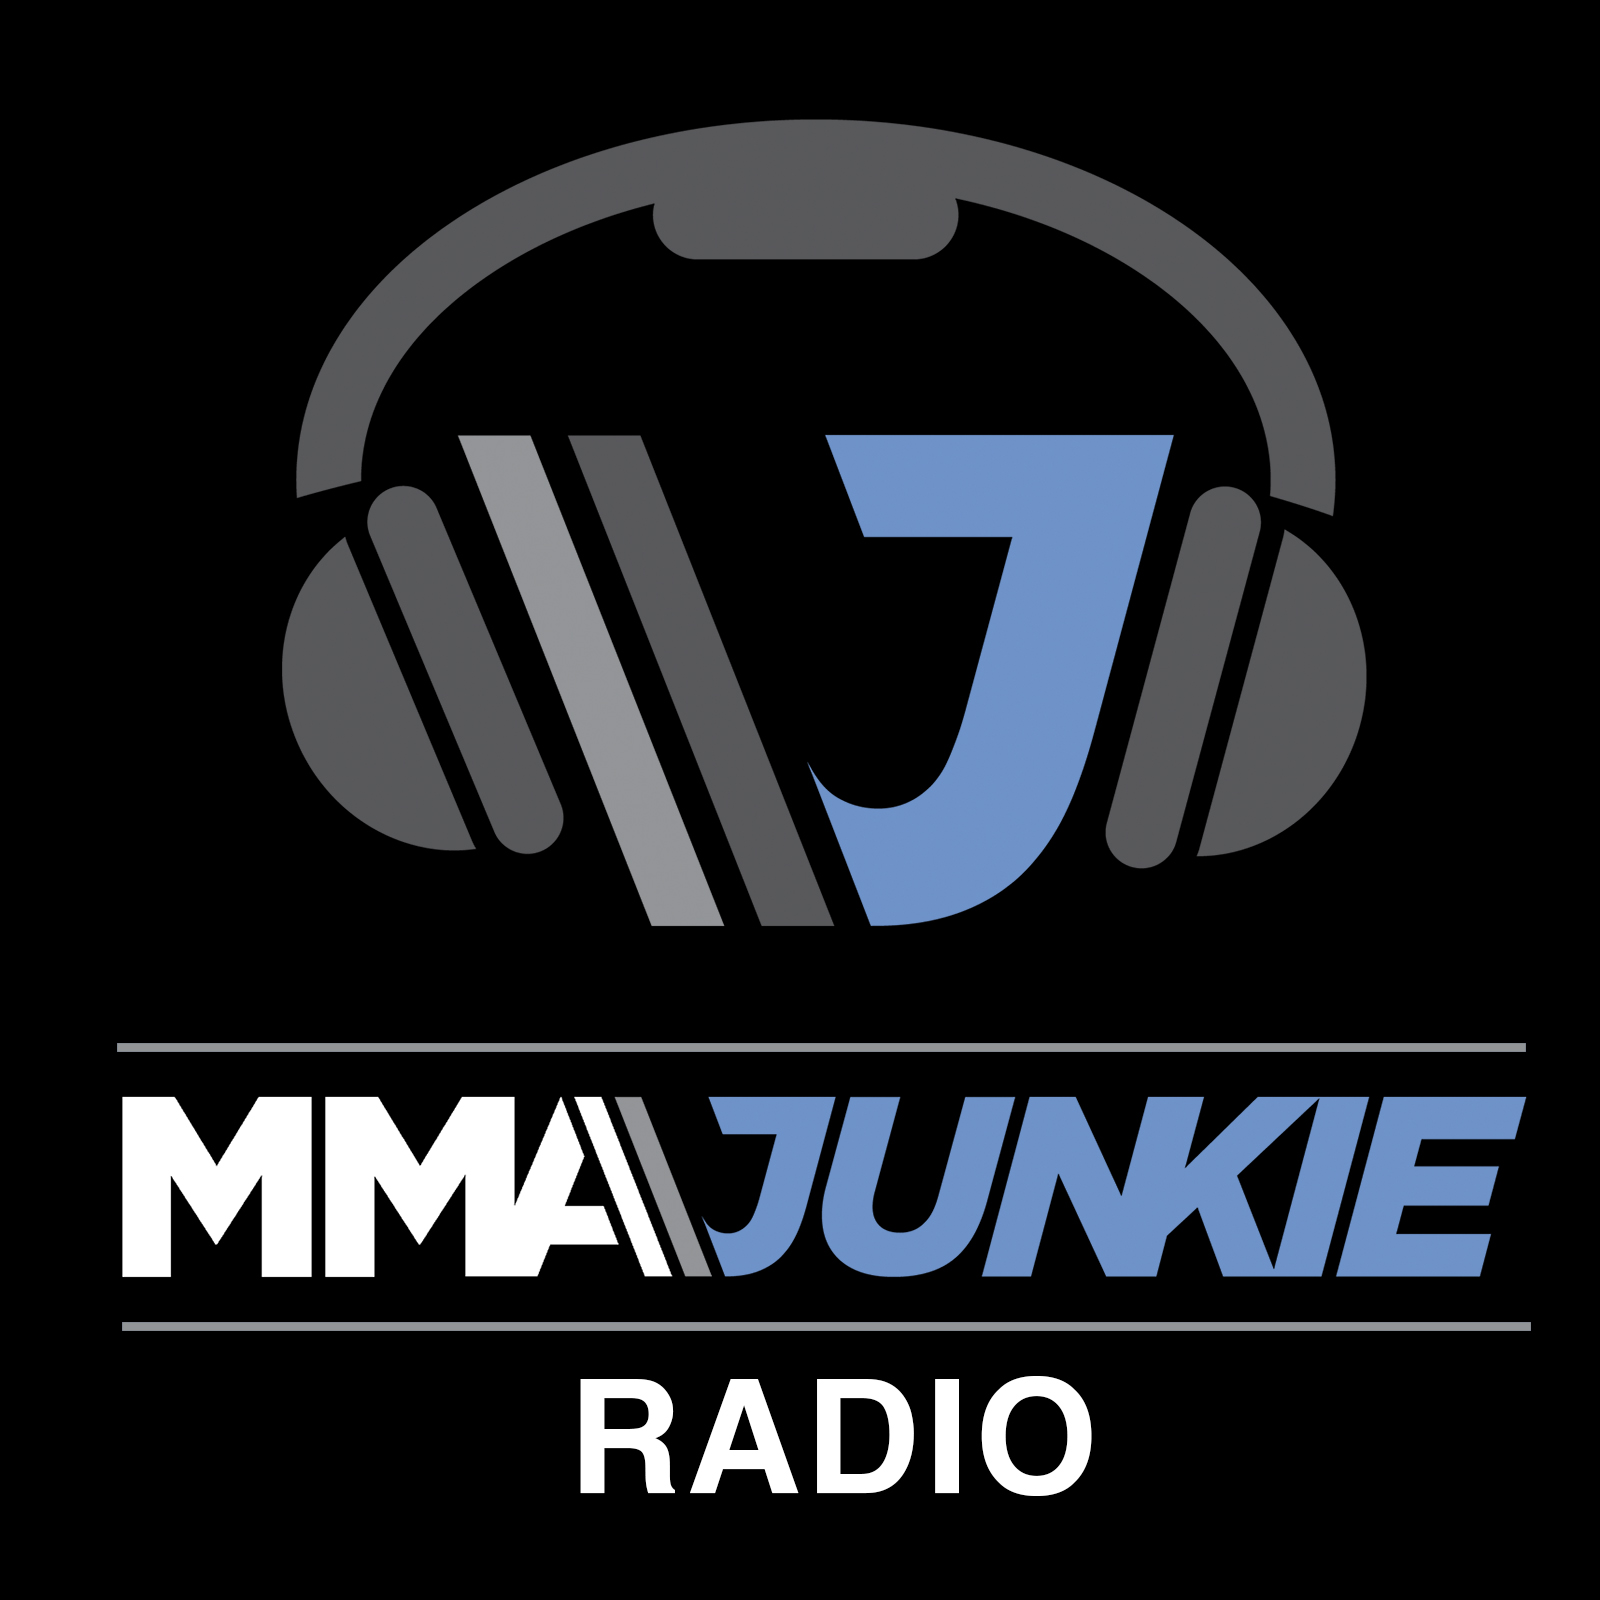 Ep. #3281: Joey Diaz & Anthony Pettis join the show, ABC makes two rule changes, more